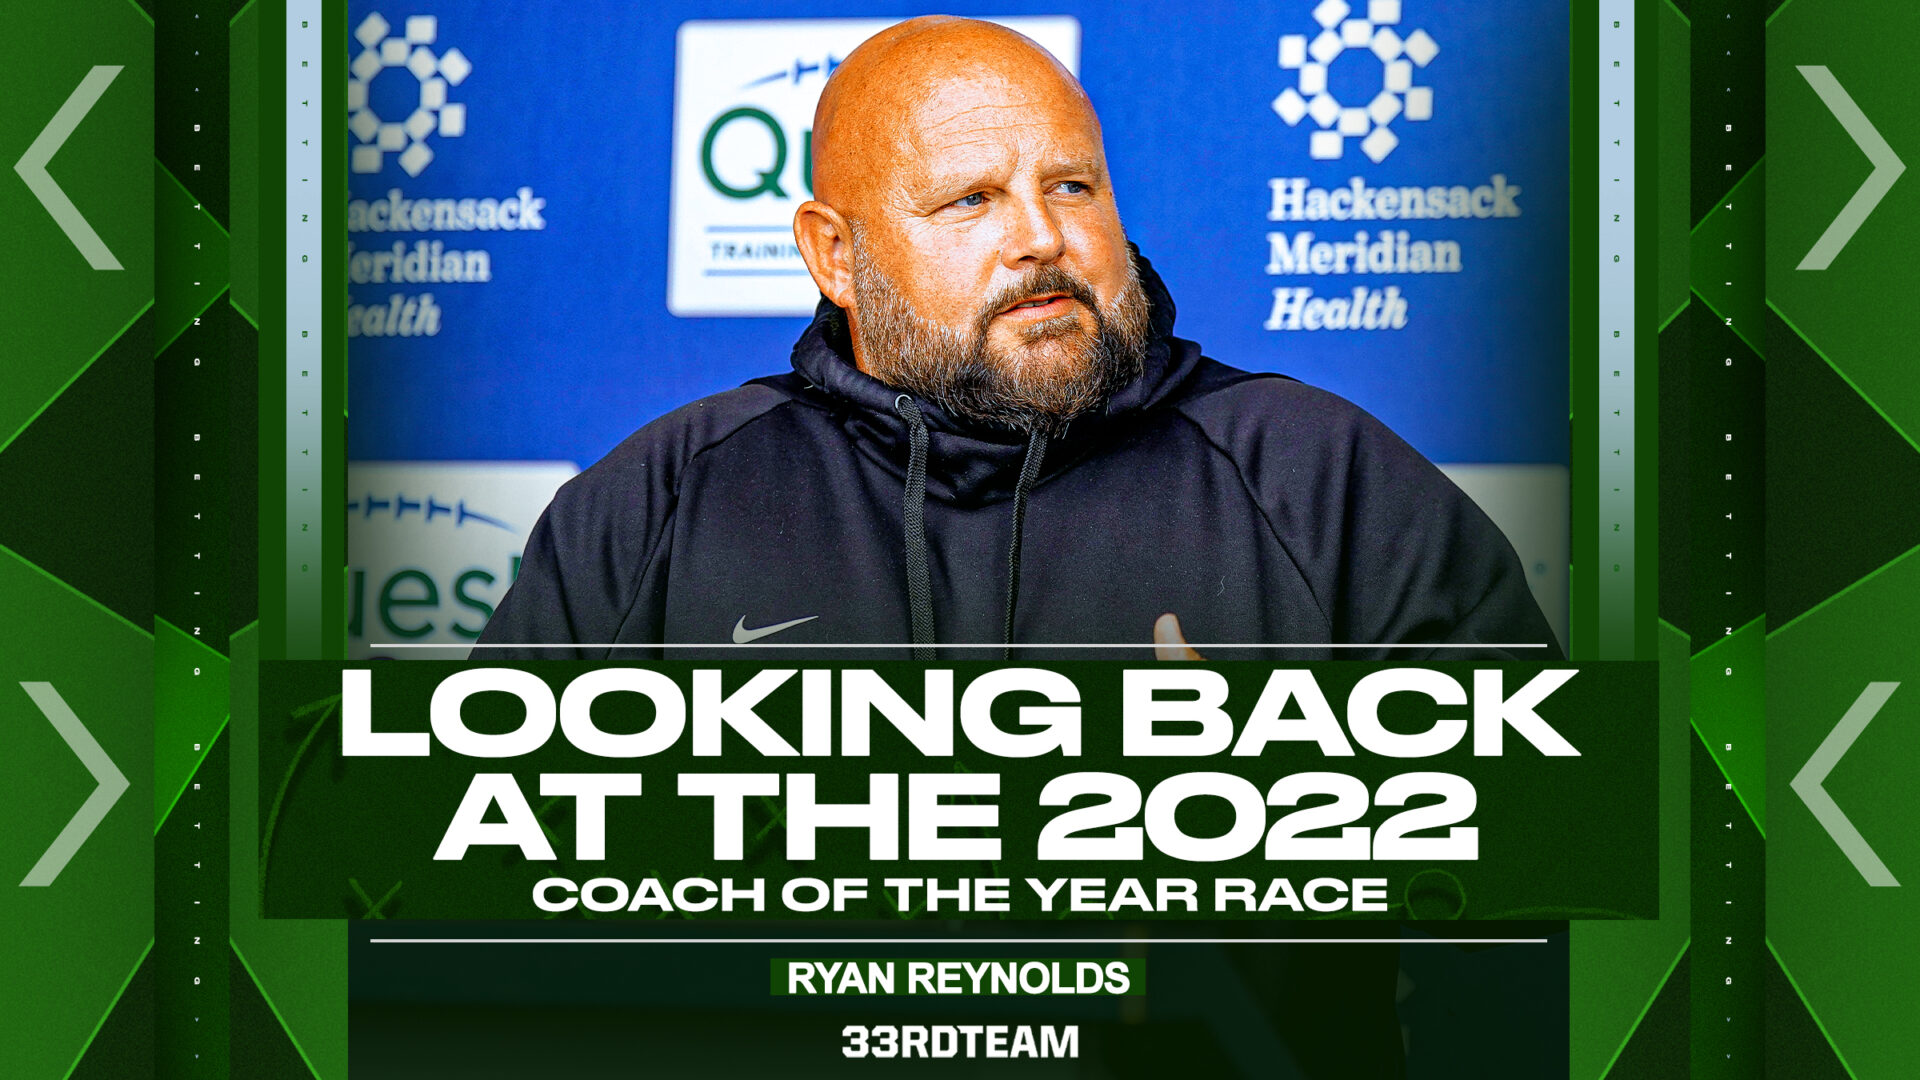 Looking Back at the 2022 Coach of the Year Race